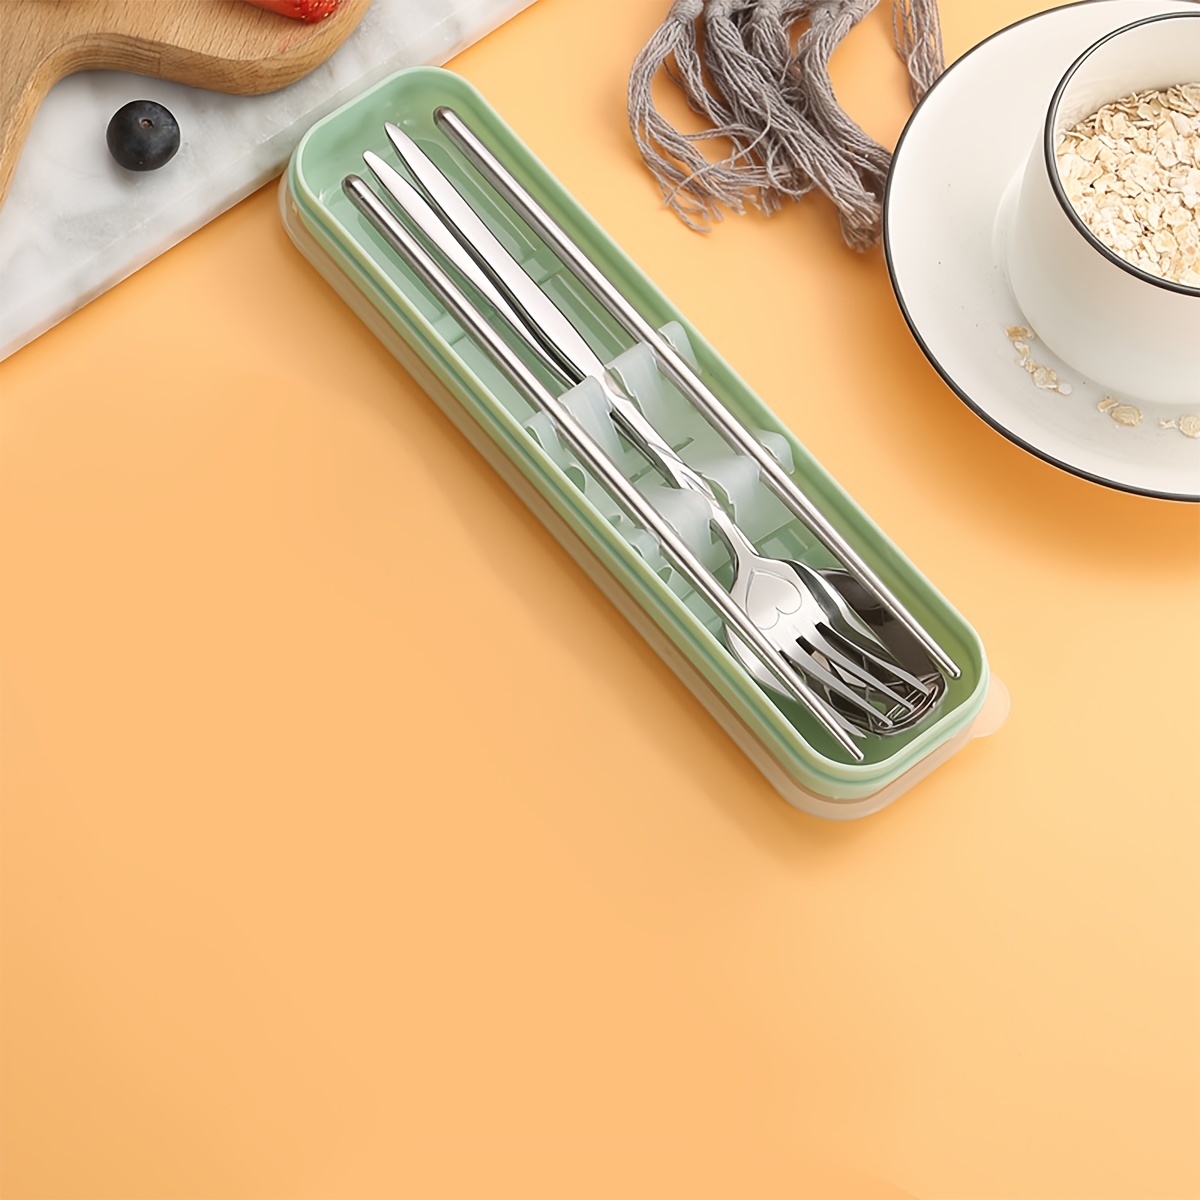 Portable Ceramic and Stainless Steel Tableware Box with Fork